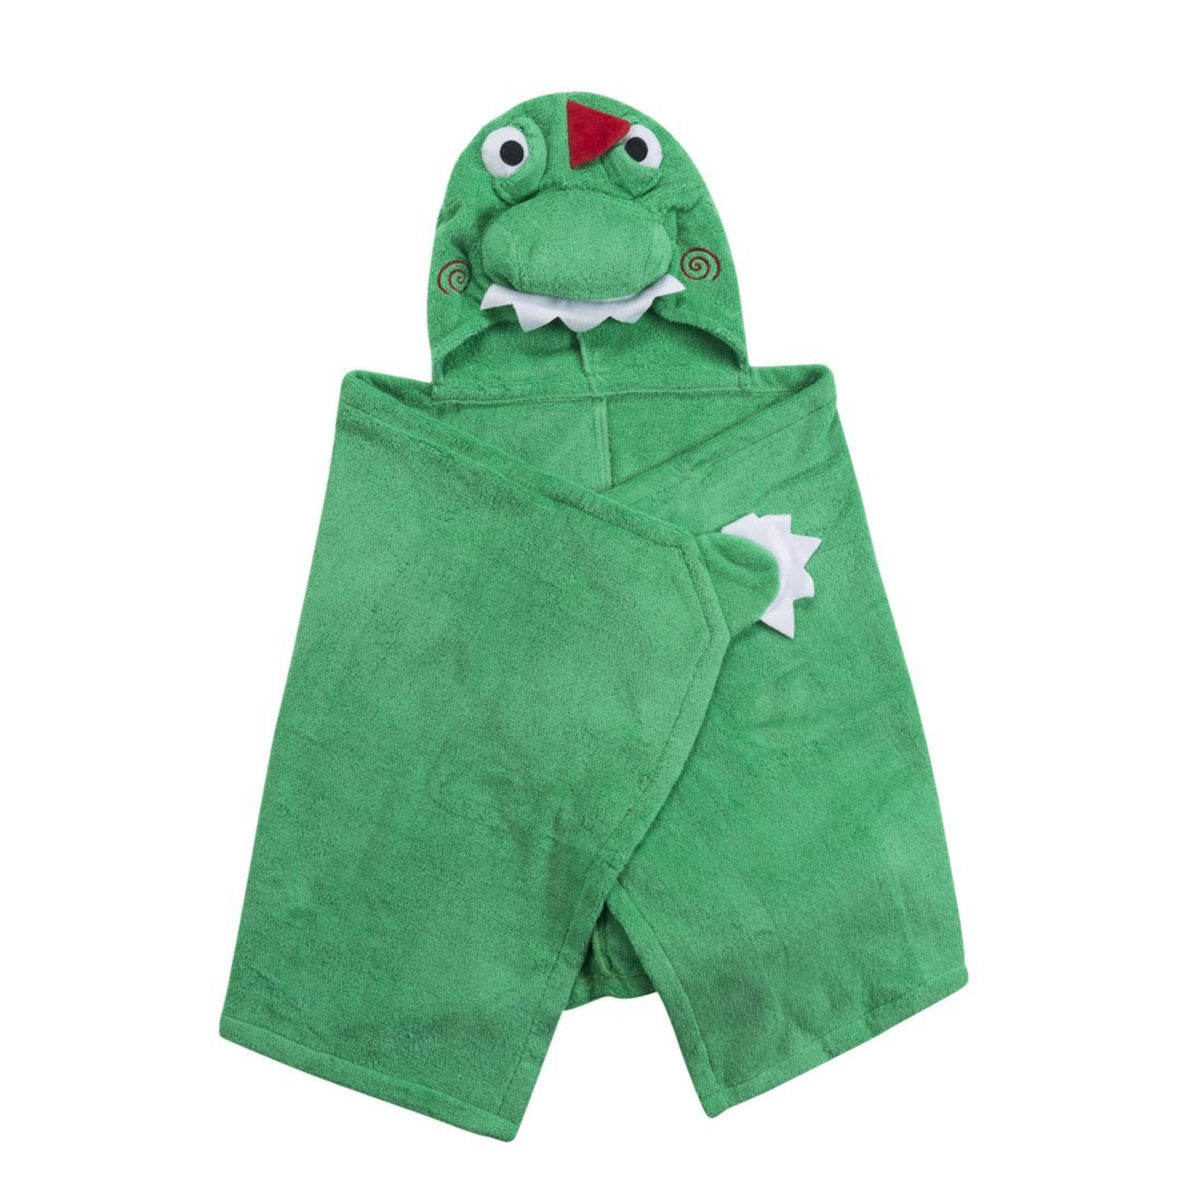 https://www.kidobebe.shop/wp-content/uploads/1692/29/zoocchini-kids-plush-terry-hooded-bath-towel-2y-devin-dinosaur-zoocchini-stay-fit-and-active-stay-active-and-fit-stay-active-and-fit_0.jpg